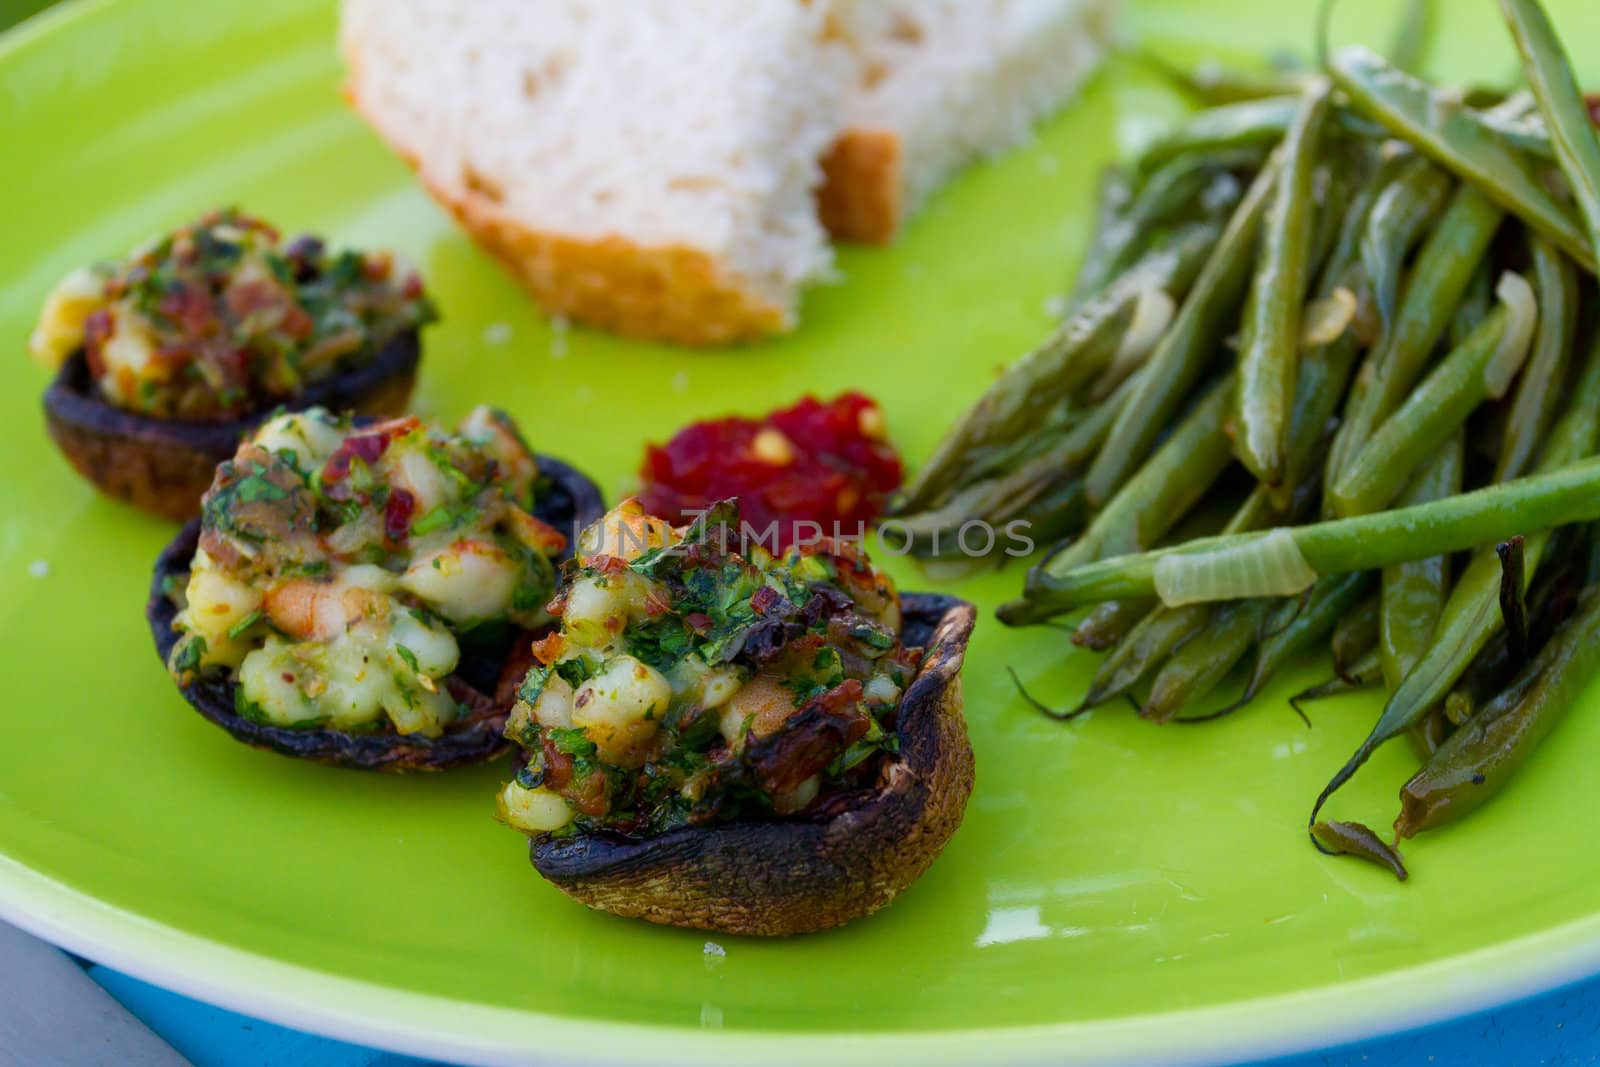 This gourmet meal of stuffed mushrooms and green beans served on a green plate with some white bread. This is dinner but the image applies to lunch also.